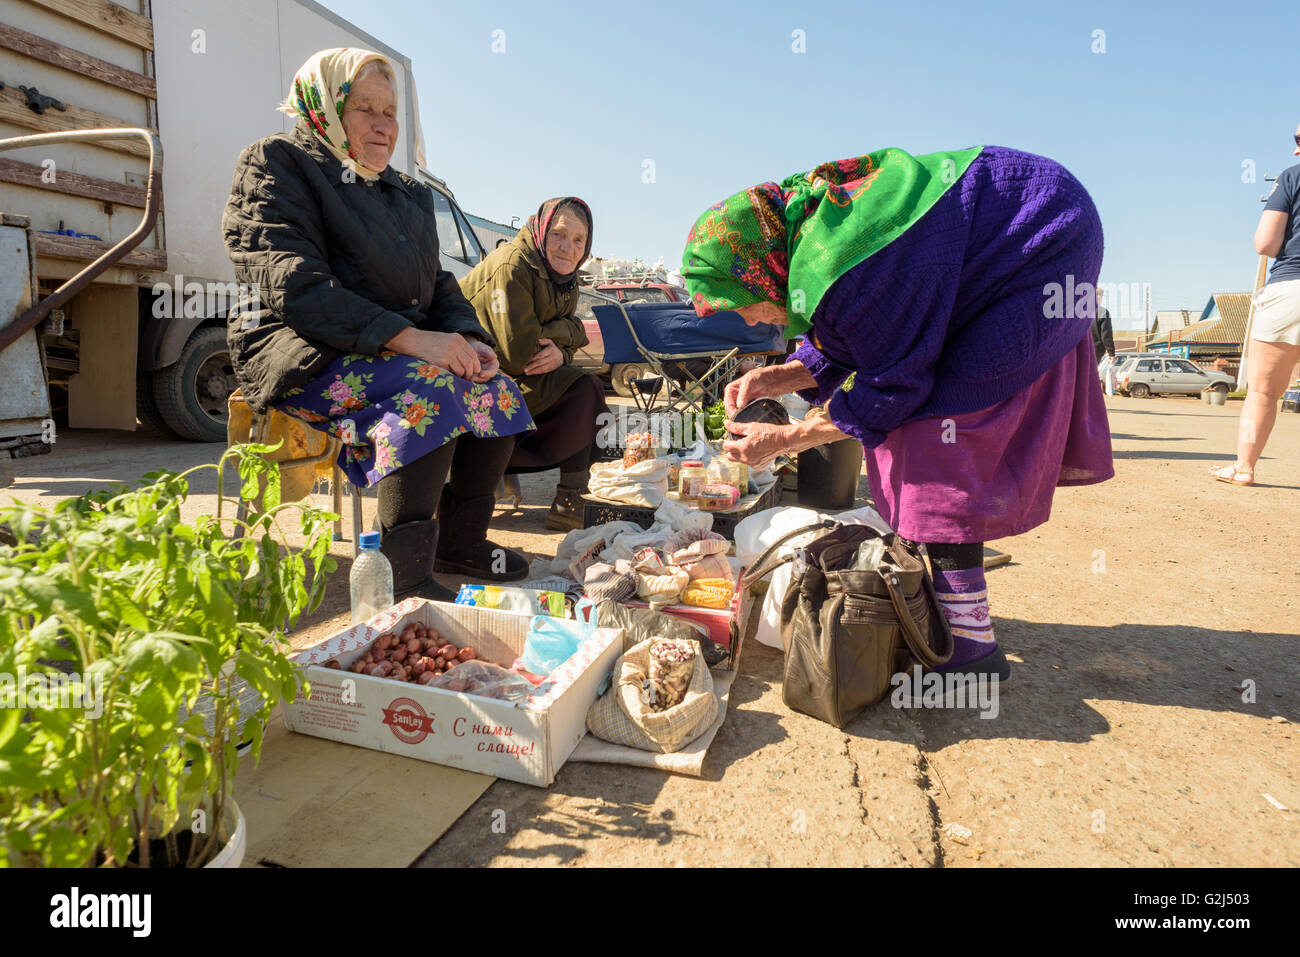 An old Russian Babushka searches her purse to buy produce from two old Russian women selling home-grown produce seeds and veg Stock Photo